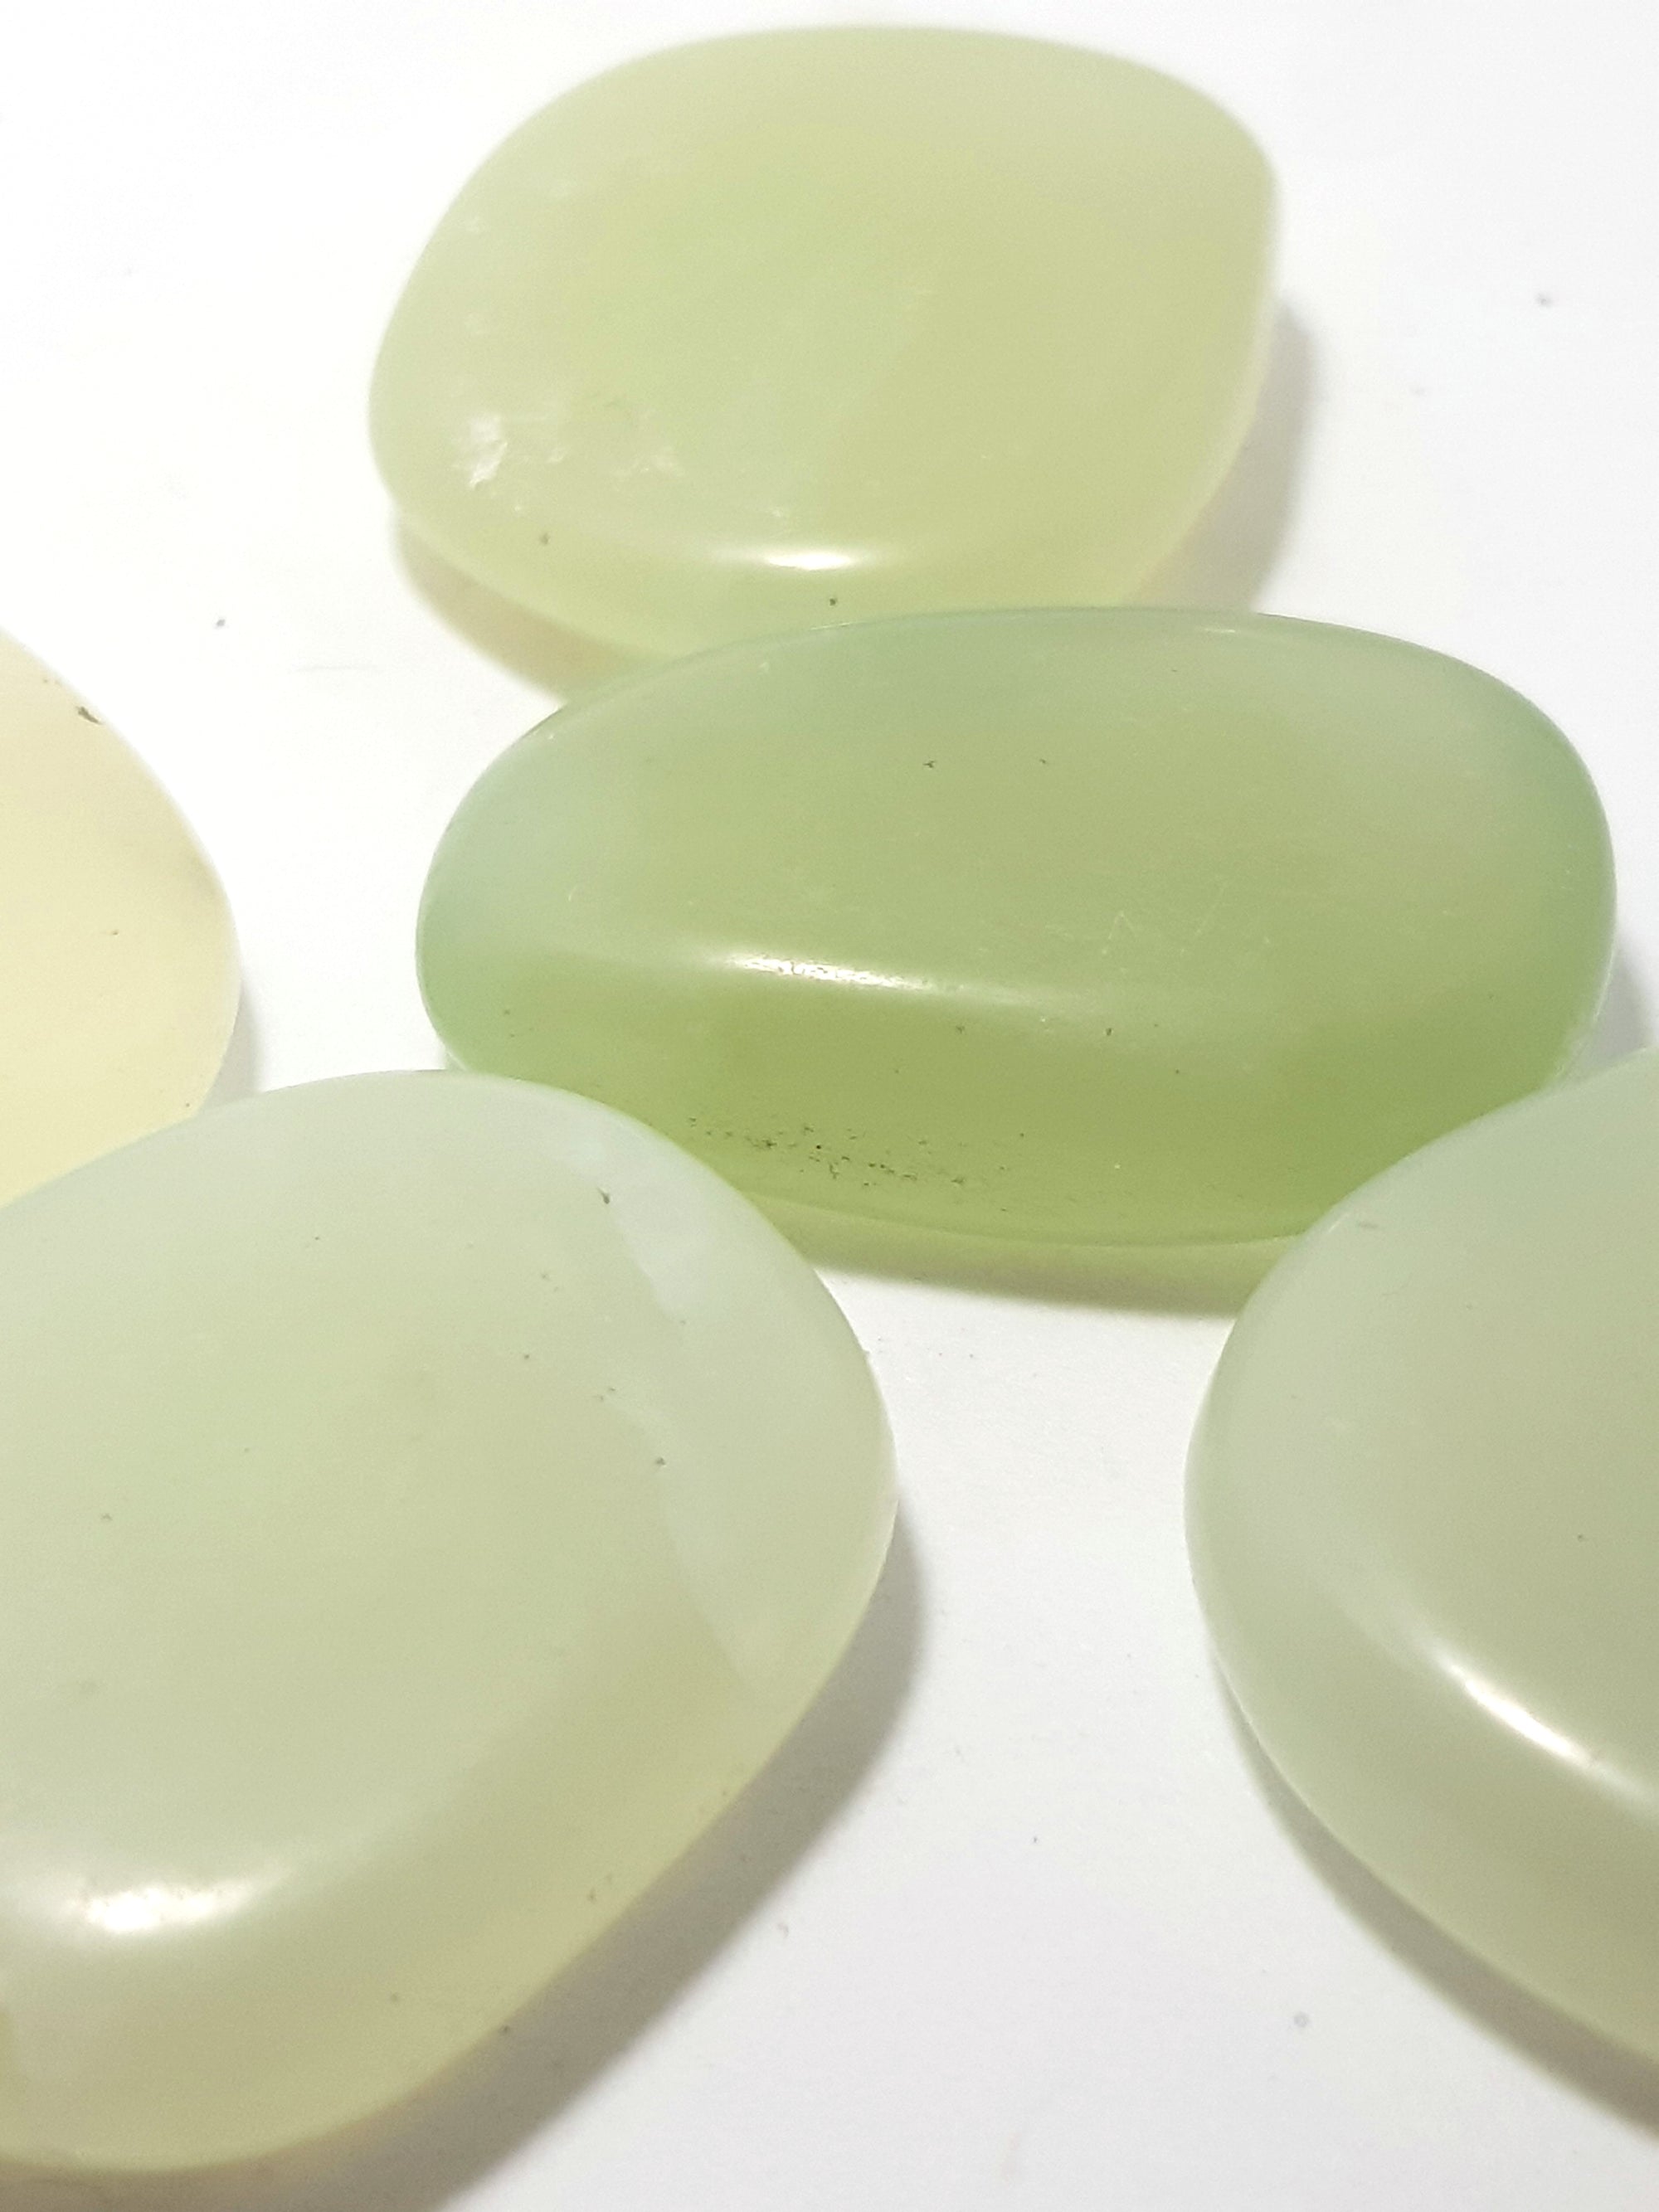 Bowenite palmstones. They are a soft green, slightly translucent and very smooth.